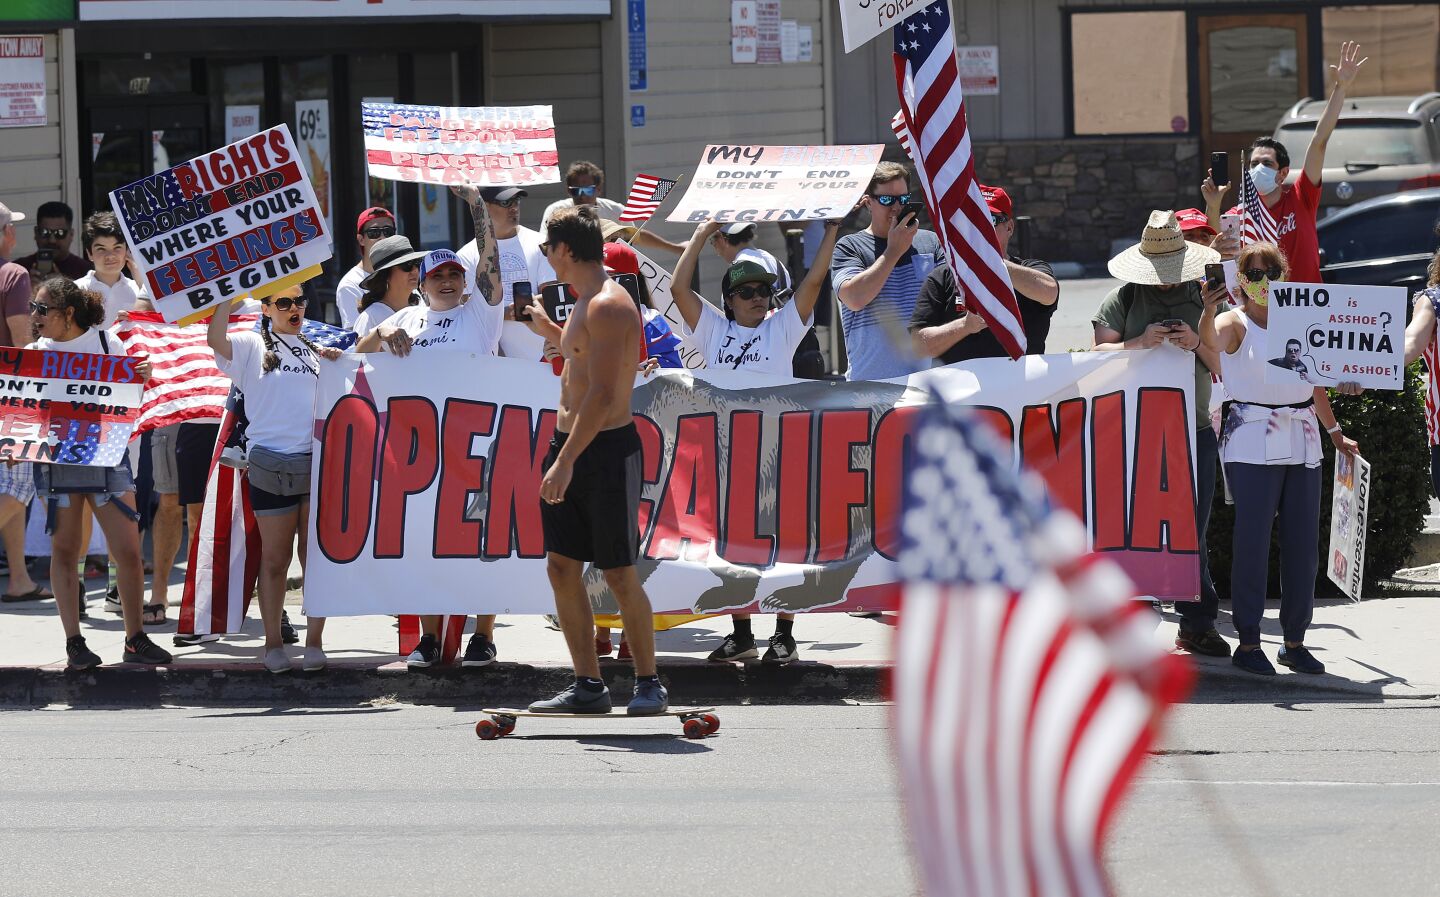 A skateboarder films protesters along Mission Blvd. in Pacific Beach during A Day of Liberty rally on Sunday, April 26, 2020. The protesters were against the government shutdown due to the coronavirus.